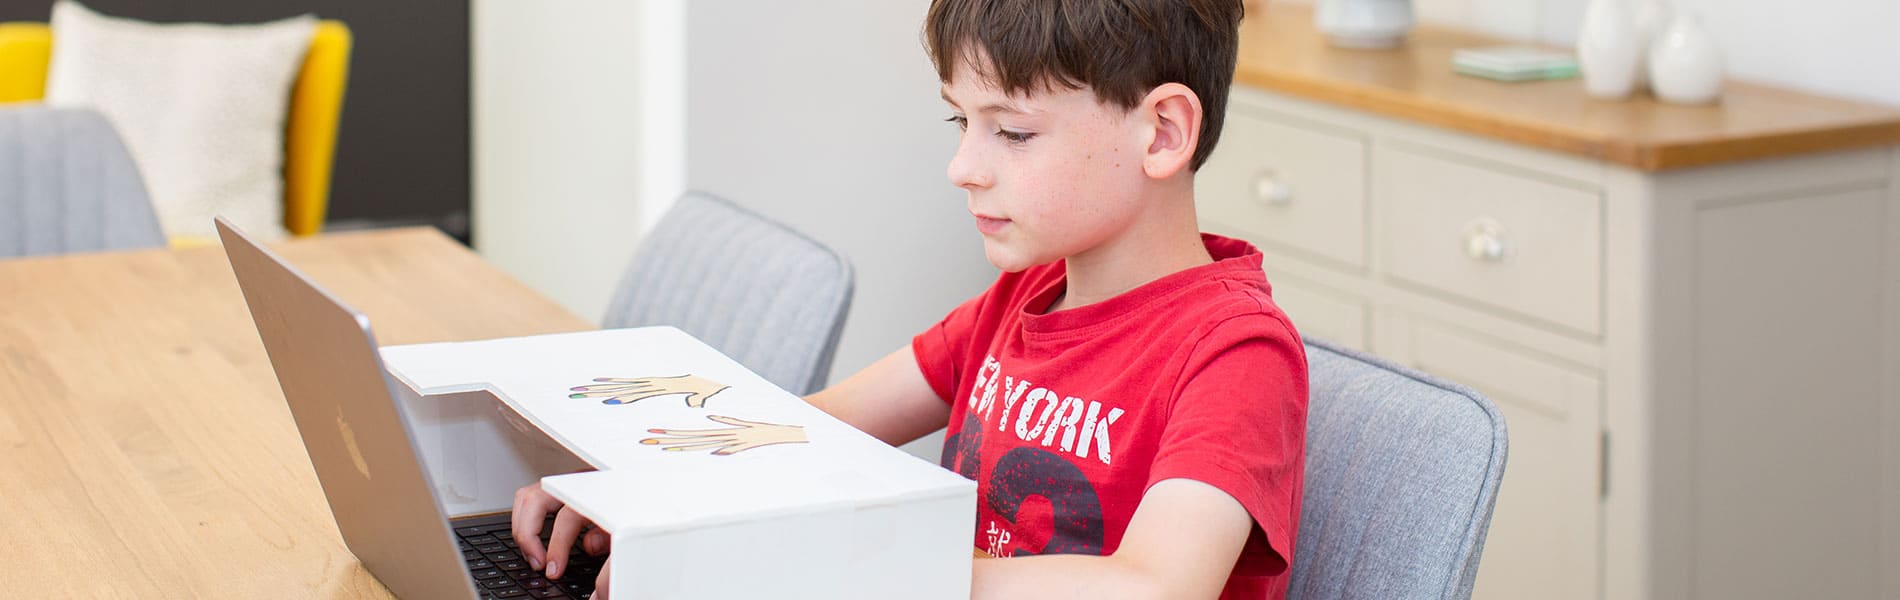 Specialist Typing Course For Children With Dyslexia